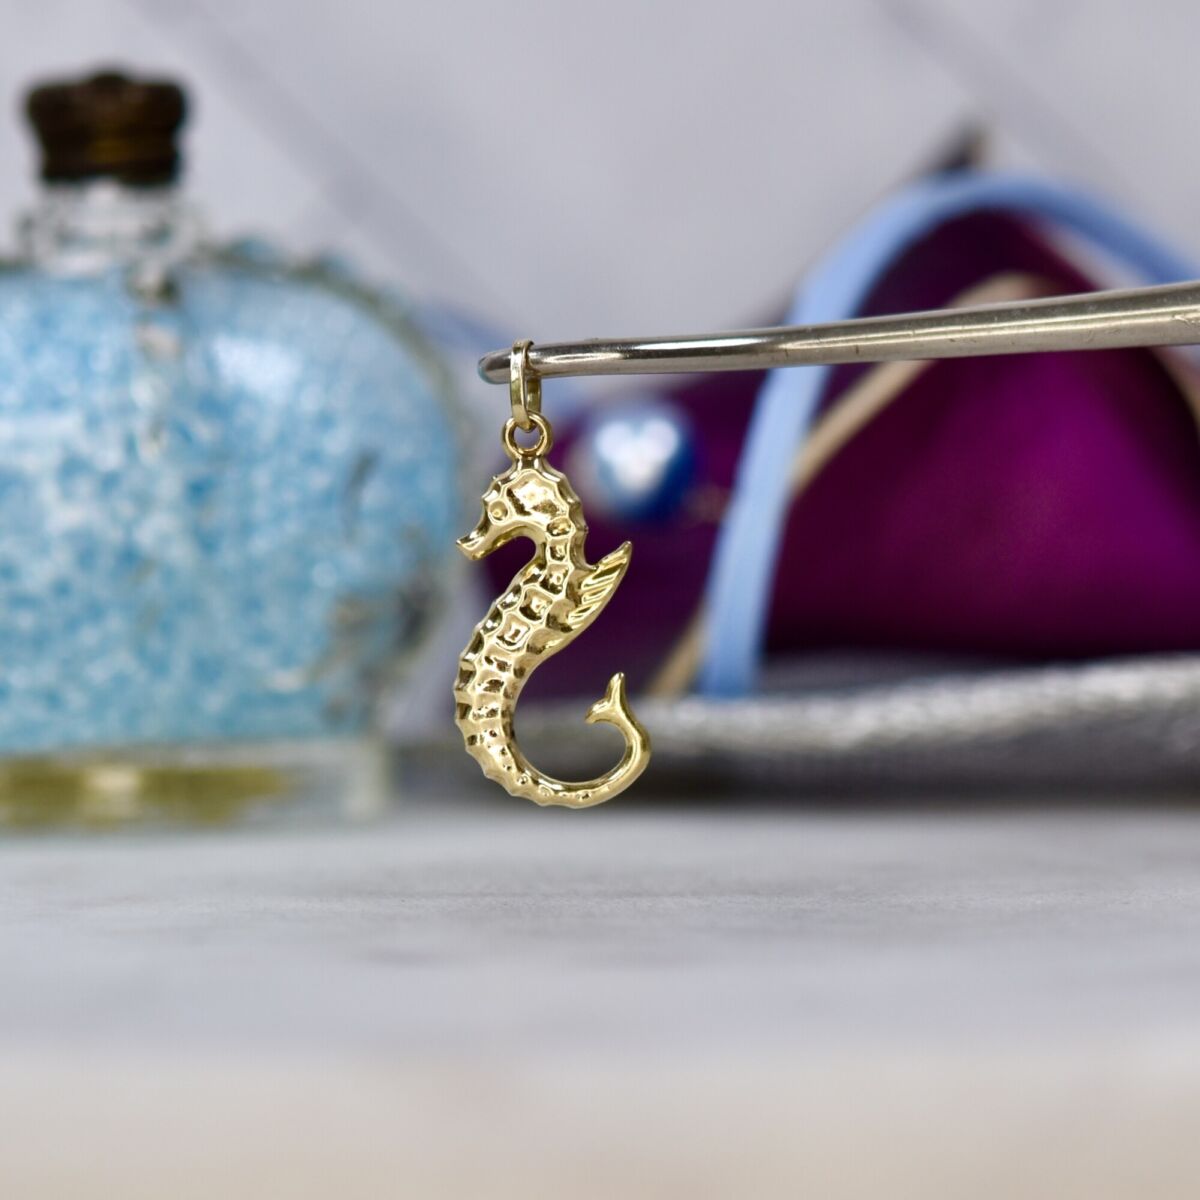 Buy Seahorse Charm in 14K Yellow Gold Online | Arnold Jewelers